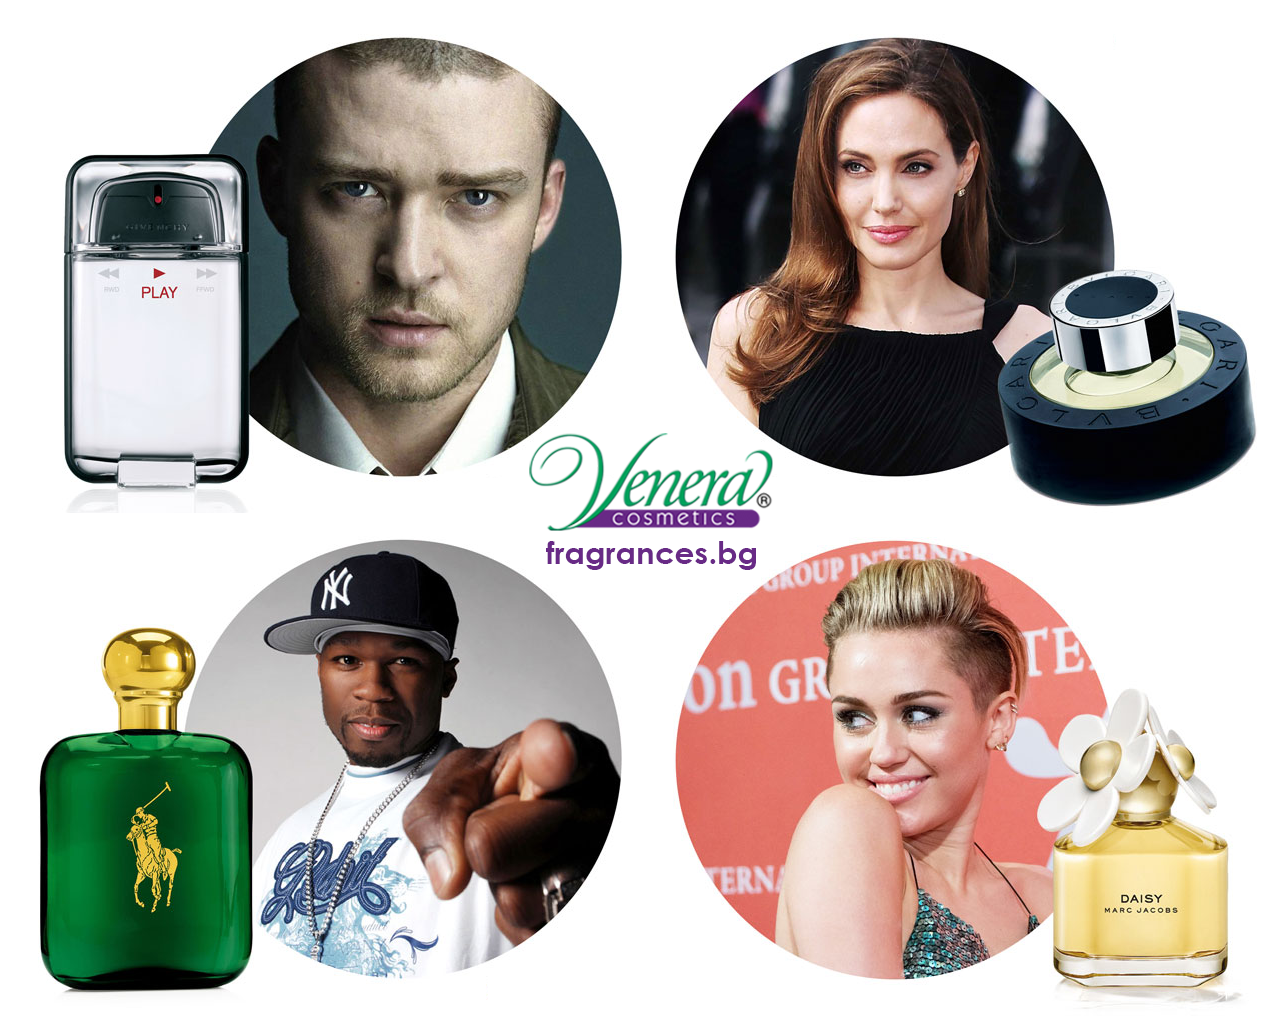 28 Famous People on Their Favorite Scented Candles 2021